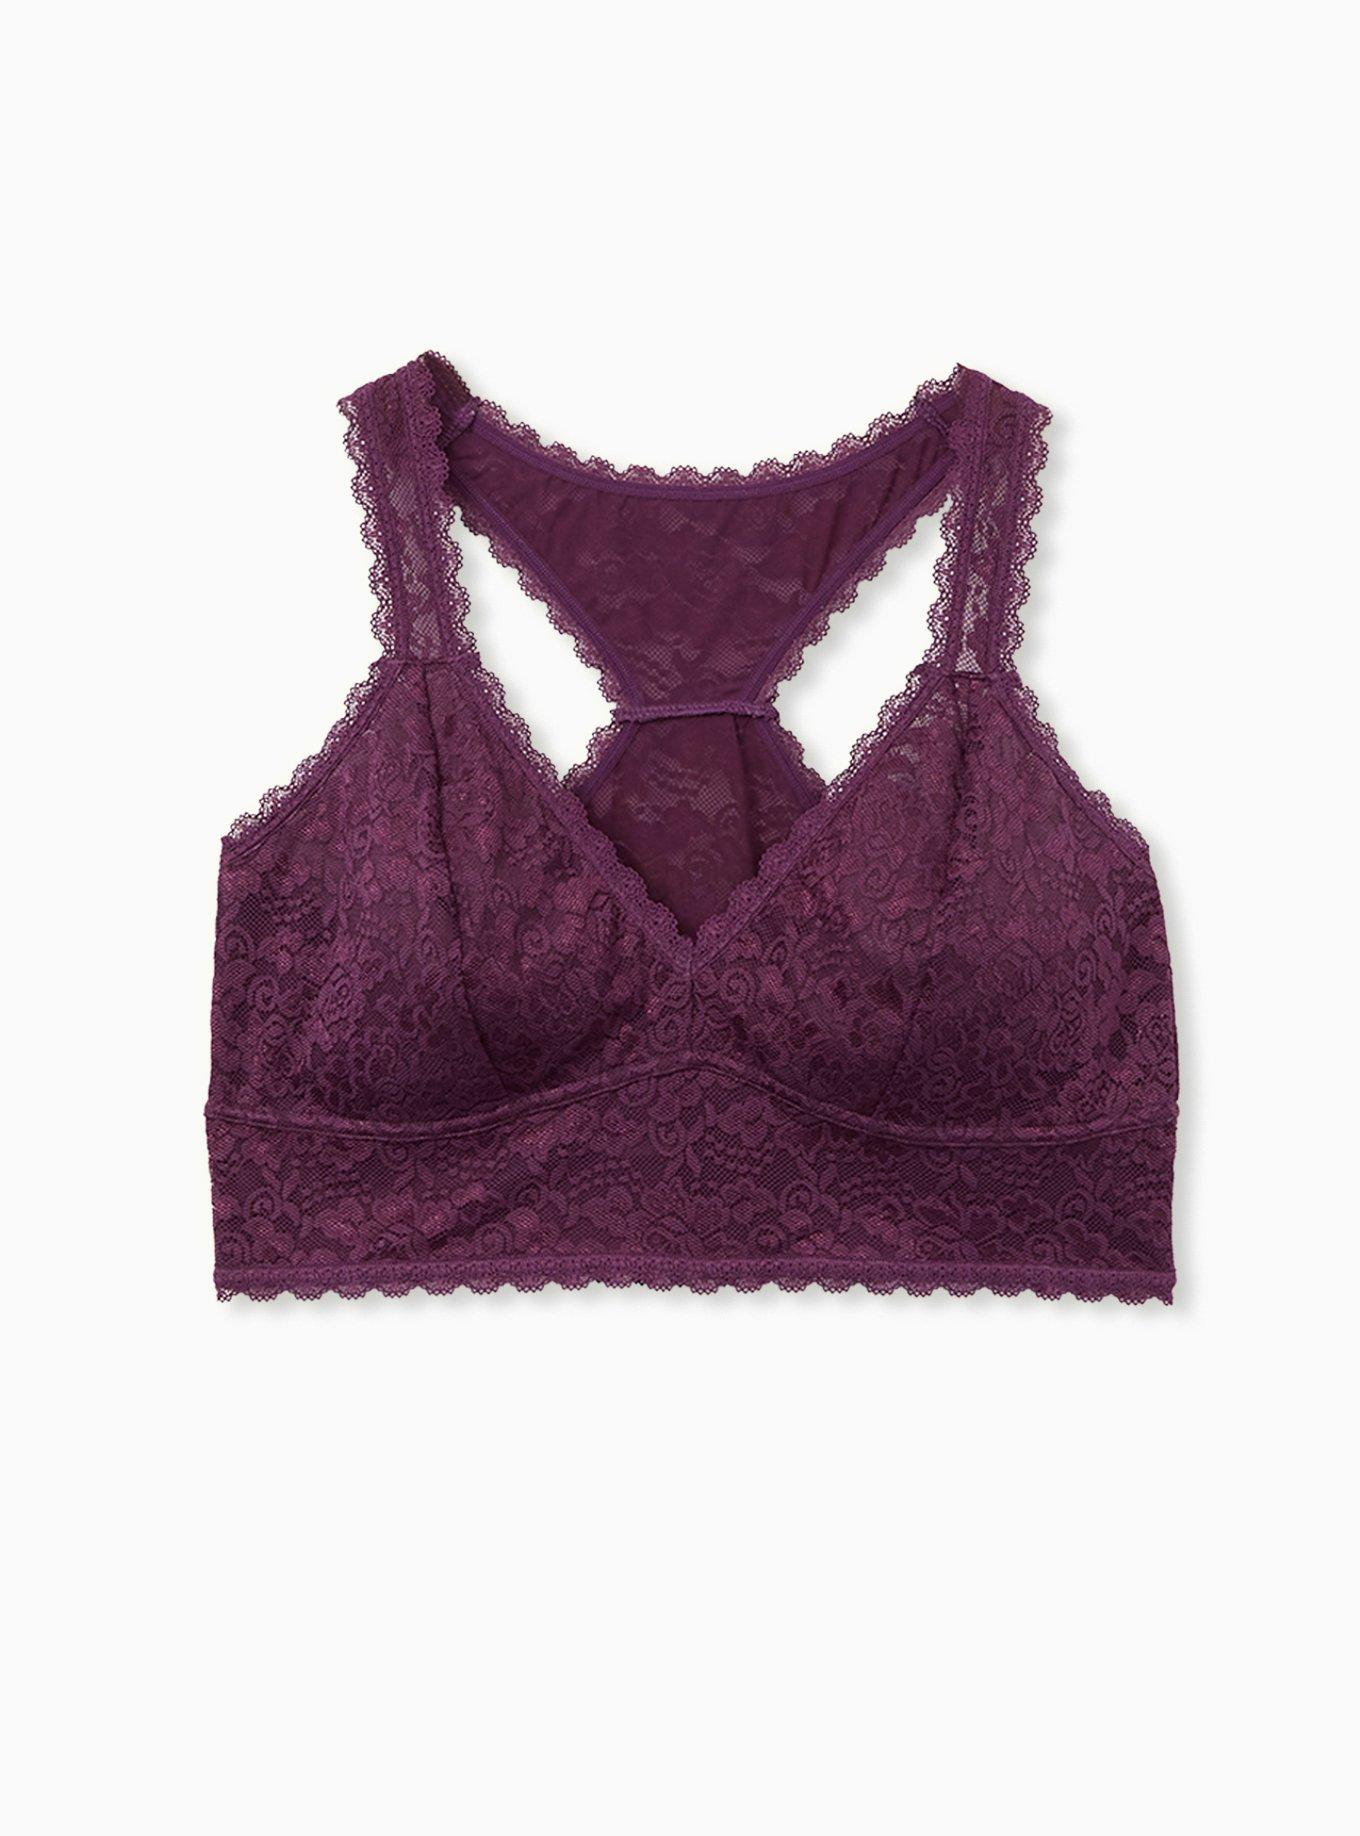 Buy Marilyn Monroe s Women's Sexy Bralette with Lacey Racer Back